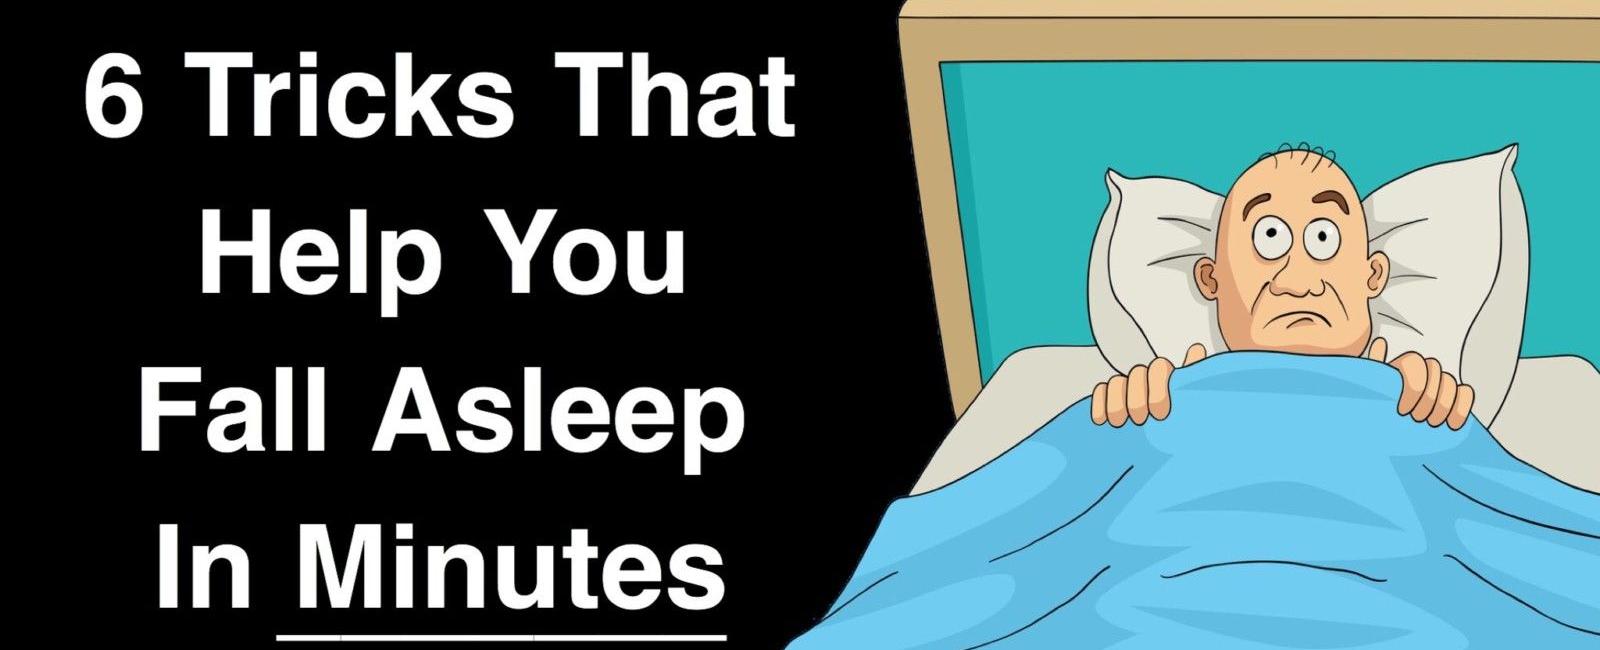 Having trouble sleeping blink fast for a minute tired eyes help you to fall asleep